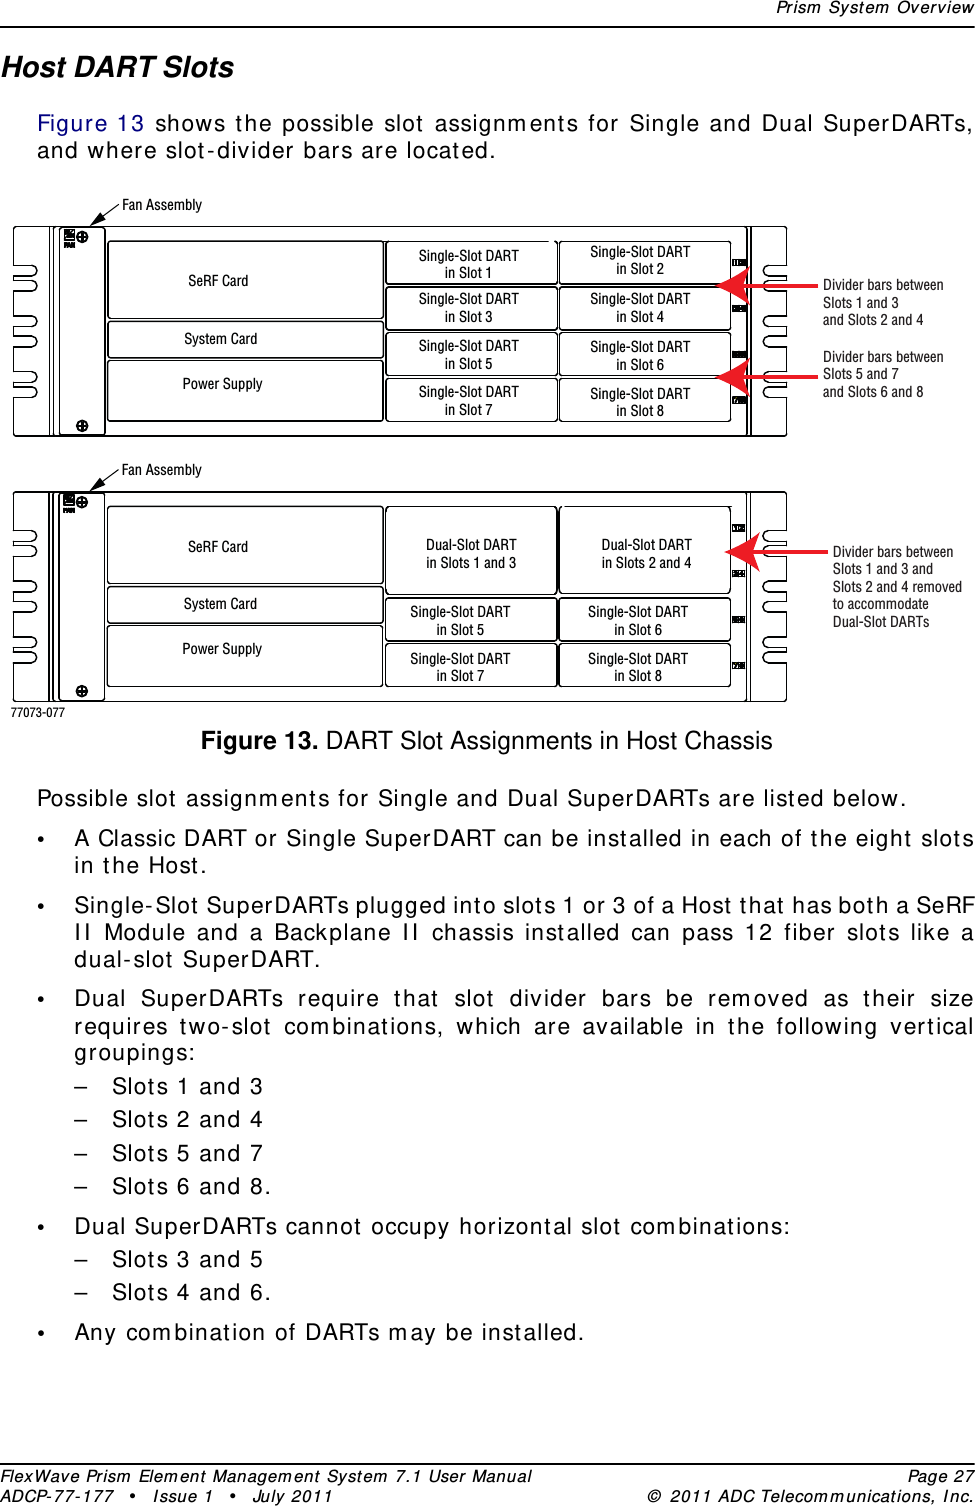 Prism System OverviewFlexWave Prism Element Management System 7.1 User Manual Page 27ADCP-77-177 • Issue 1 • July 2011 © 2011 ADC Telecommunications, Inc.Host DART SlotsFigure 13 shows the possible slot assignments for Single and Dual SuperDARTs, and where slot-divider bars are located.Figure 13. DART Slot Assignments in Host ChassisPossible slot assignments for Single and Dual SuperDARTs are listed below.•A Classic DART or Single SuperDART can be installed in each of the eight slots in the Host.•Single-Slot SuperDARTs plugged into slots 1 or 3 of a Host that has both a SeRF II Module and a Backplane II chassis installed can pass 12 fiber slots like a dual-slot SuperDART.•Dual SuperDARTs require that slot divider bars be removed as their size requires two-slot combinations, which are available in the following vertical groupings:–Slots 1 and 3–Slots 2 and 4–Slots 5 and 7–Slots 6 and 8.•Dual SuperDARTs cannot occupy horizontal slot combinations:–Slots 3 and 5–Slots 4 and 6.•Any combination of DARTs may be installed.SeRF CardSystem CardPower SupplySingle-Slot DARTin Slot 1Single-Slot DARTin Slot 3Single-Slot DARTin Slot 2Single-Slot DARTin Slot 4Single-Slot DARTin Slot 7Single-Slot DARTin Slot 5Single-Slot DARTin Slot 8Single-Slot DARTin Slot 6Fan AssemblyDivider bars betweenSlots 1 and 3and Slots 2 and 4Divider bars betweenSlots 5 and 7and Slots 6 and 8SeRF CardSystem CardPower SupplyFan Assembly77073-077Dual-Slot DARTin Slots 1 and 3Dual-Slot DARTin Slots 2 and 4Single-Slot DARTin Slot 7Single-Slot DARTin Slot 5Single-Slot DARTin Slot 8Single-Slot DARTin Slot 6Divider bars betweenSlots 1 and 3 and Slots 2 and 4 removedto accommodateDual-Slot DARTs